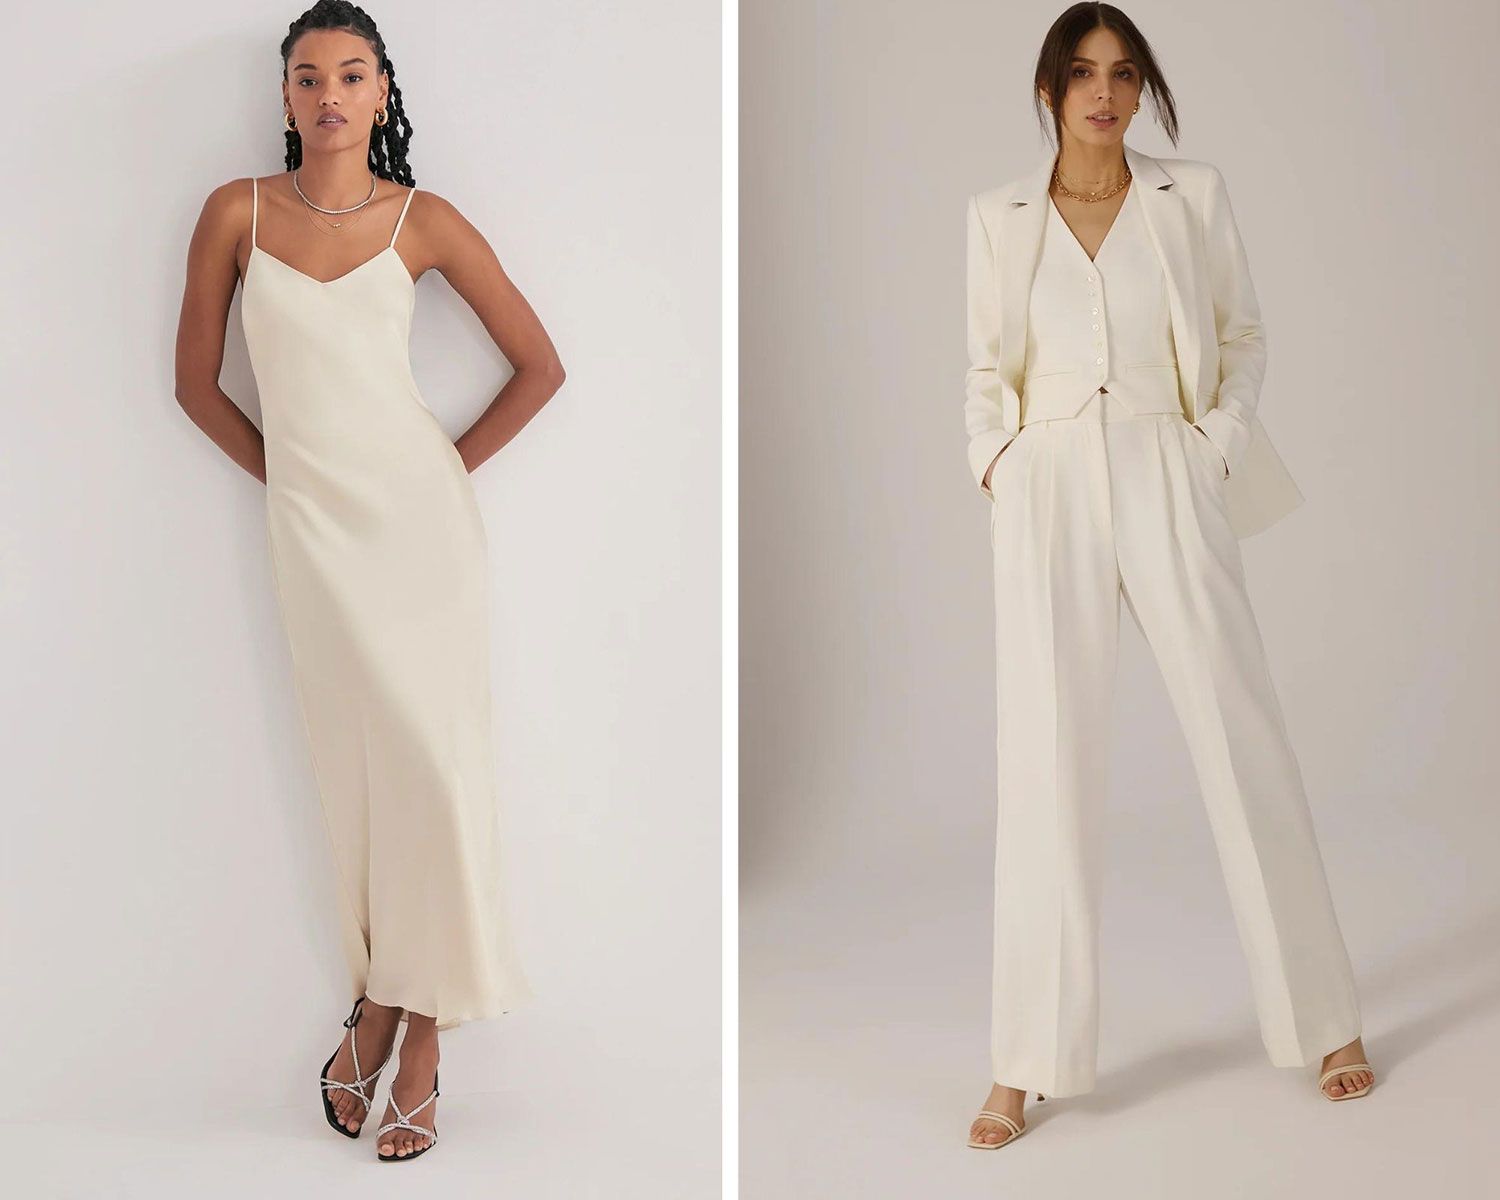 Favorite Daughter has launched a bridal capsule for Spring.